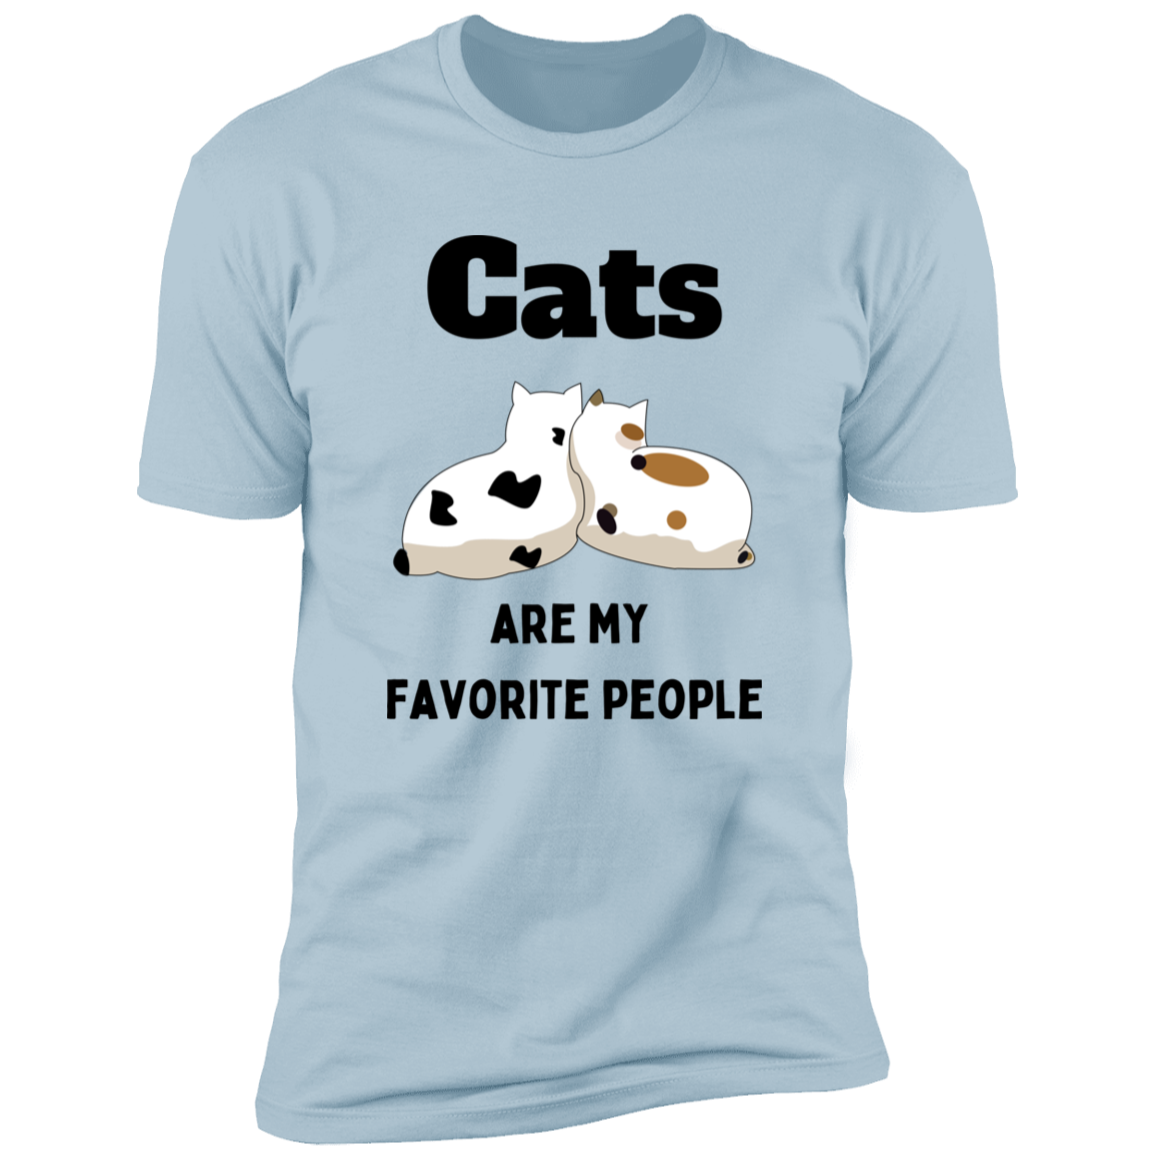 Cats Are My Favorite People T-shirt, Cat Shirt for humans, in light blue